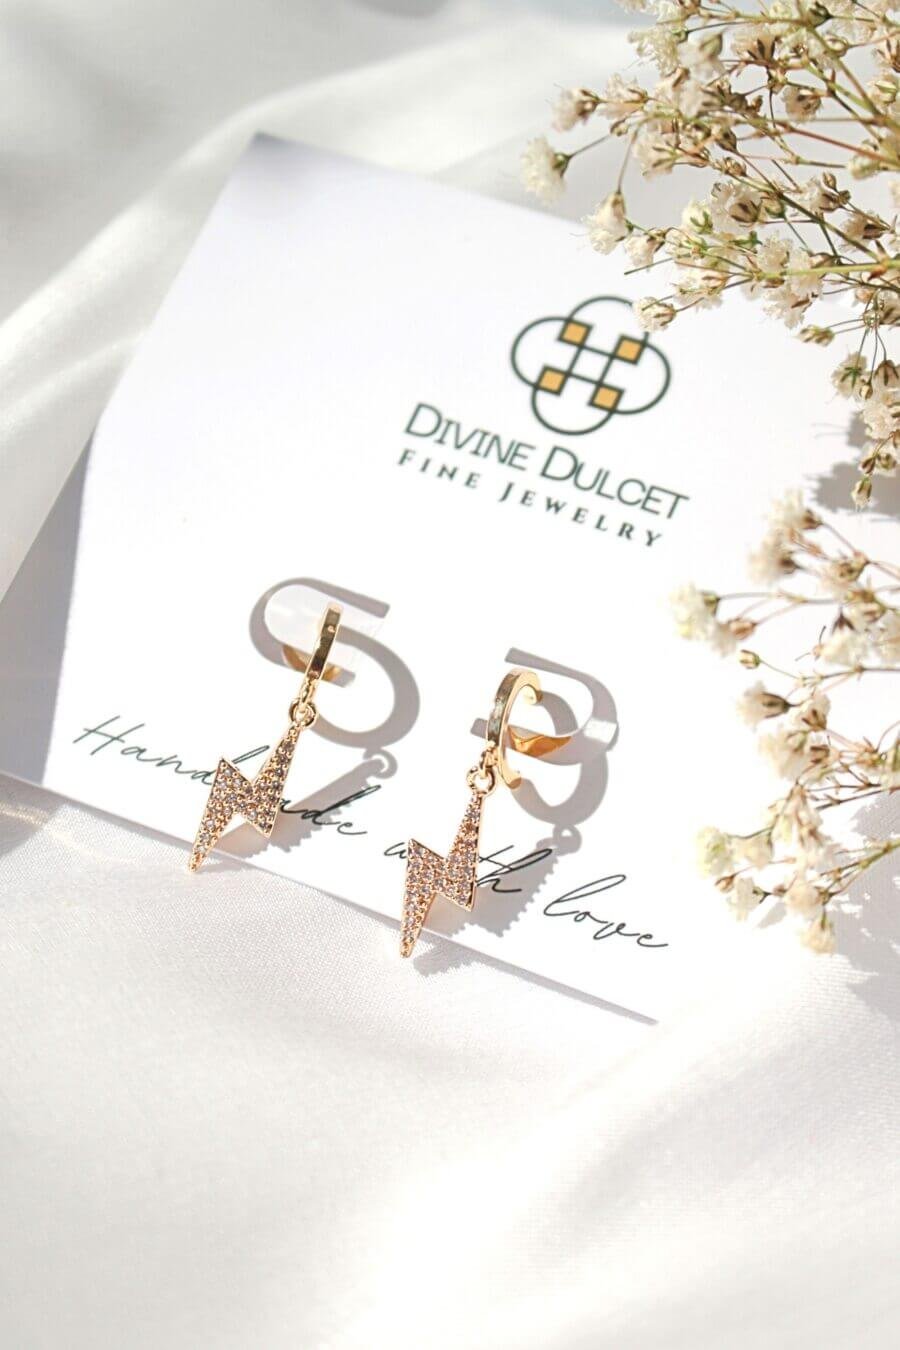 Idylle Blossom Studs, 3 Golds And Diamonds - Jewelry - Categories